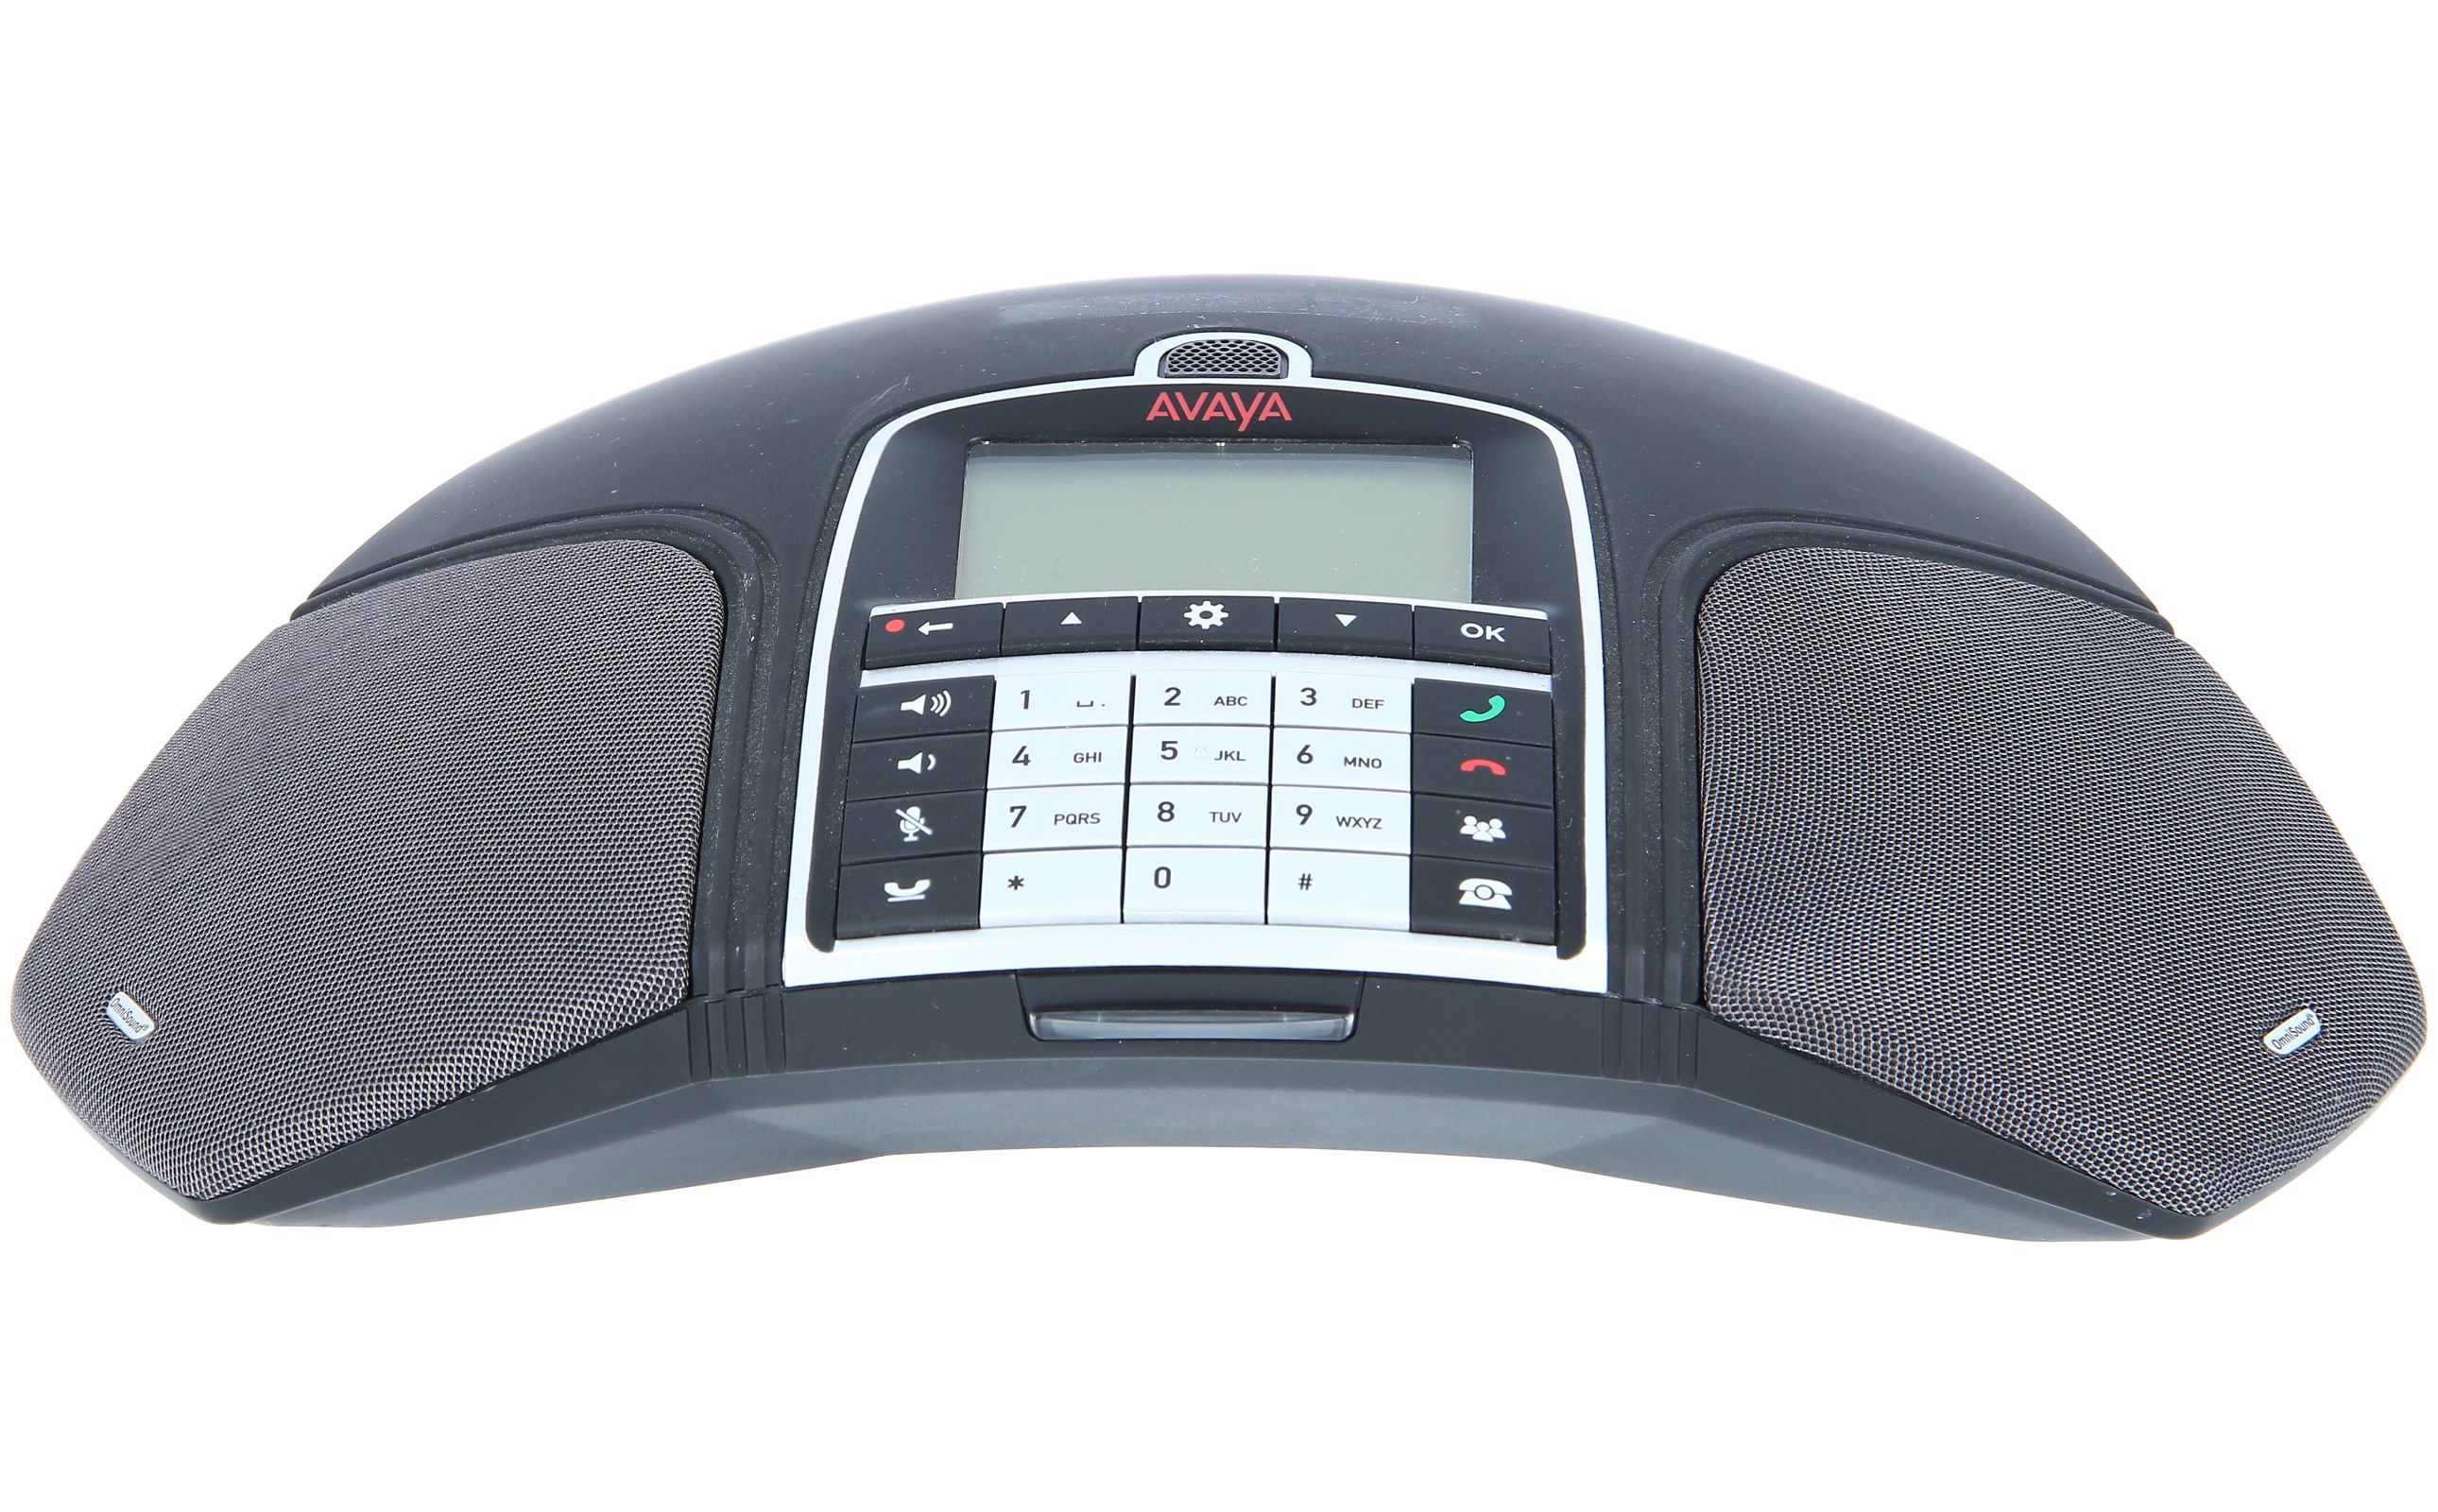 Avaya B179 SIP Conference Phone 700504740 for sale online 